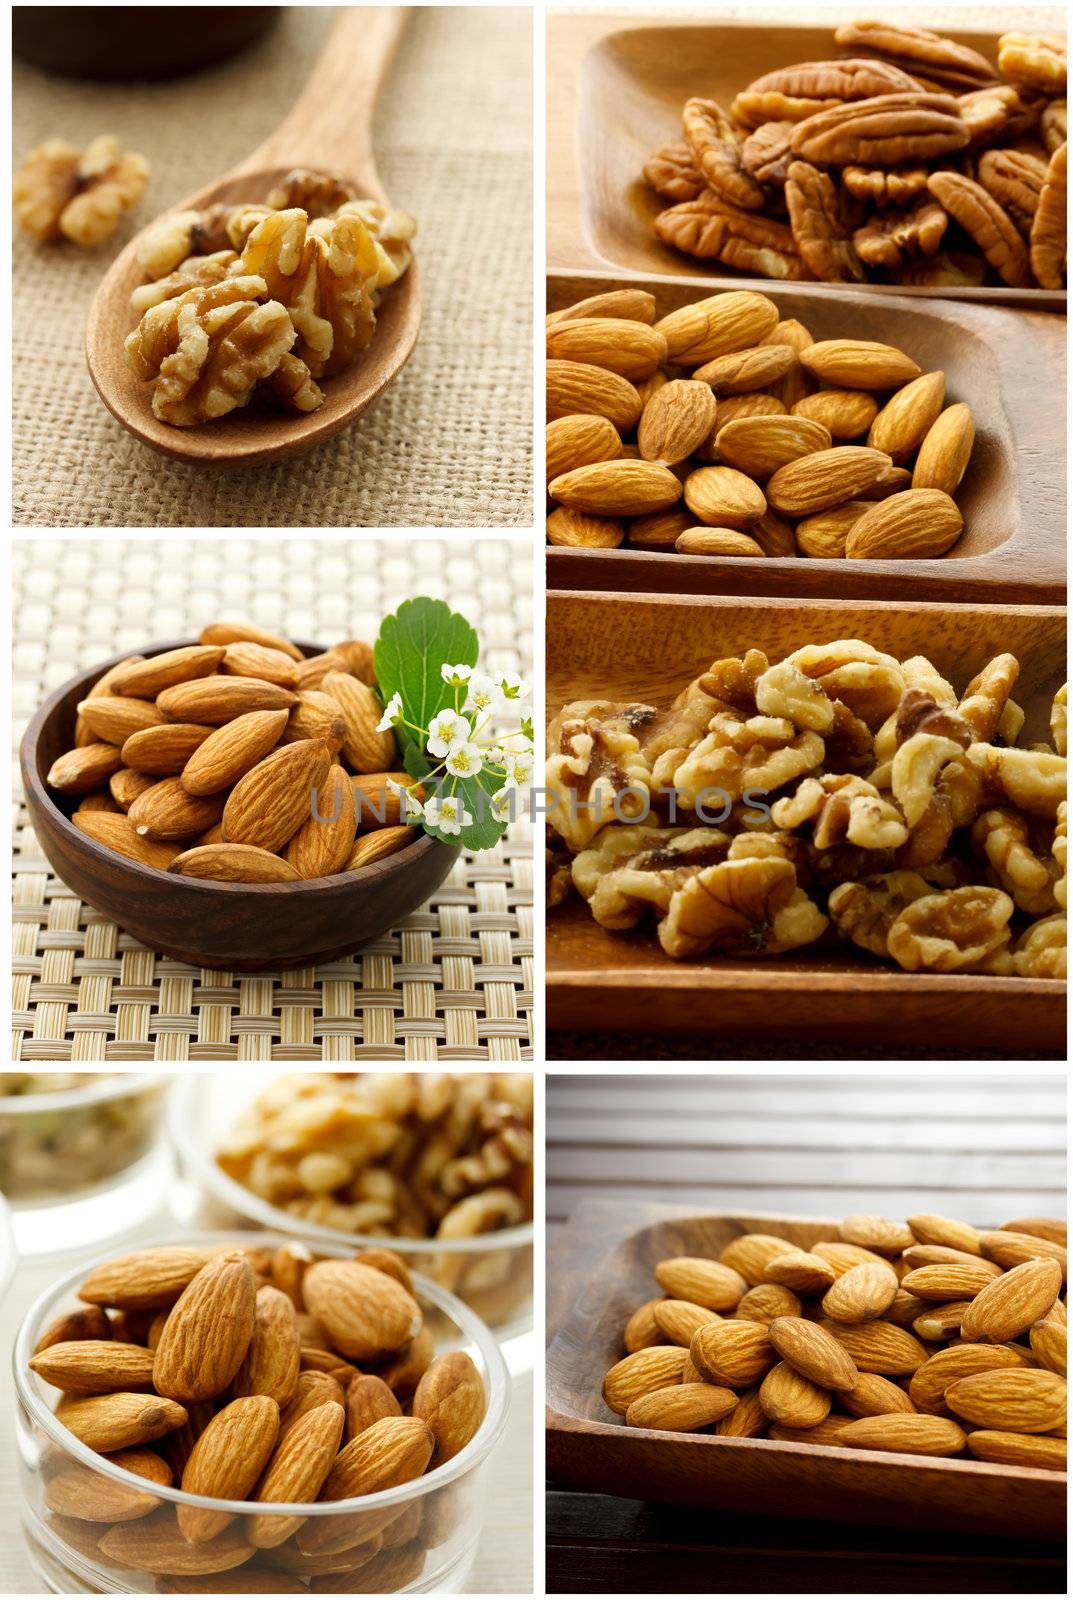 Collage of Nuts (Almonds, Walnuts, Pecans)